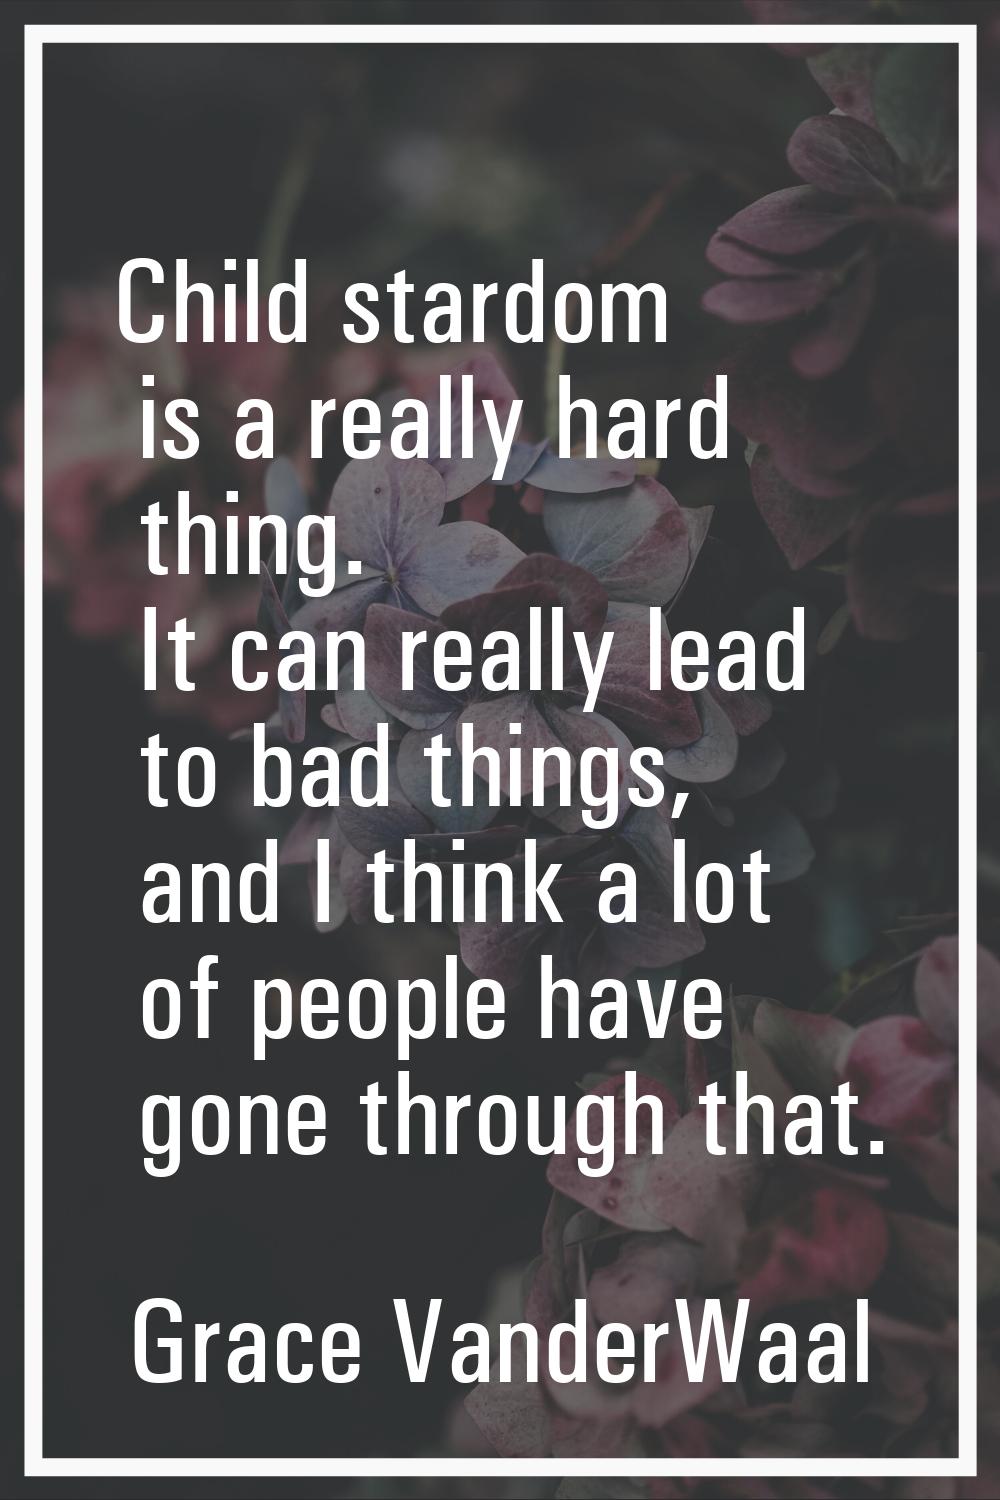 Child stardom is a really hard thing. It can really lead to bad things, and I think a lot of people